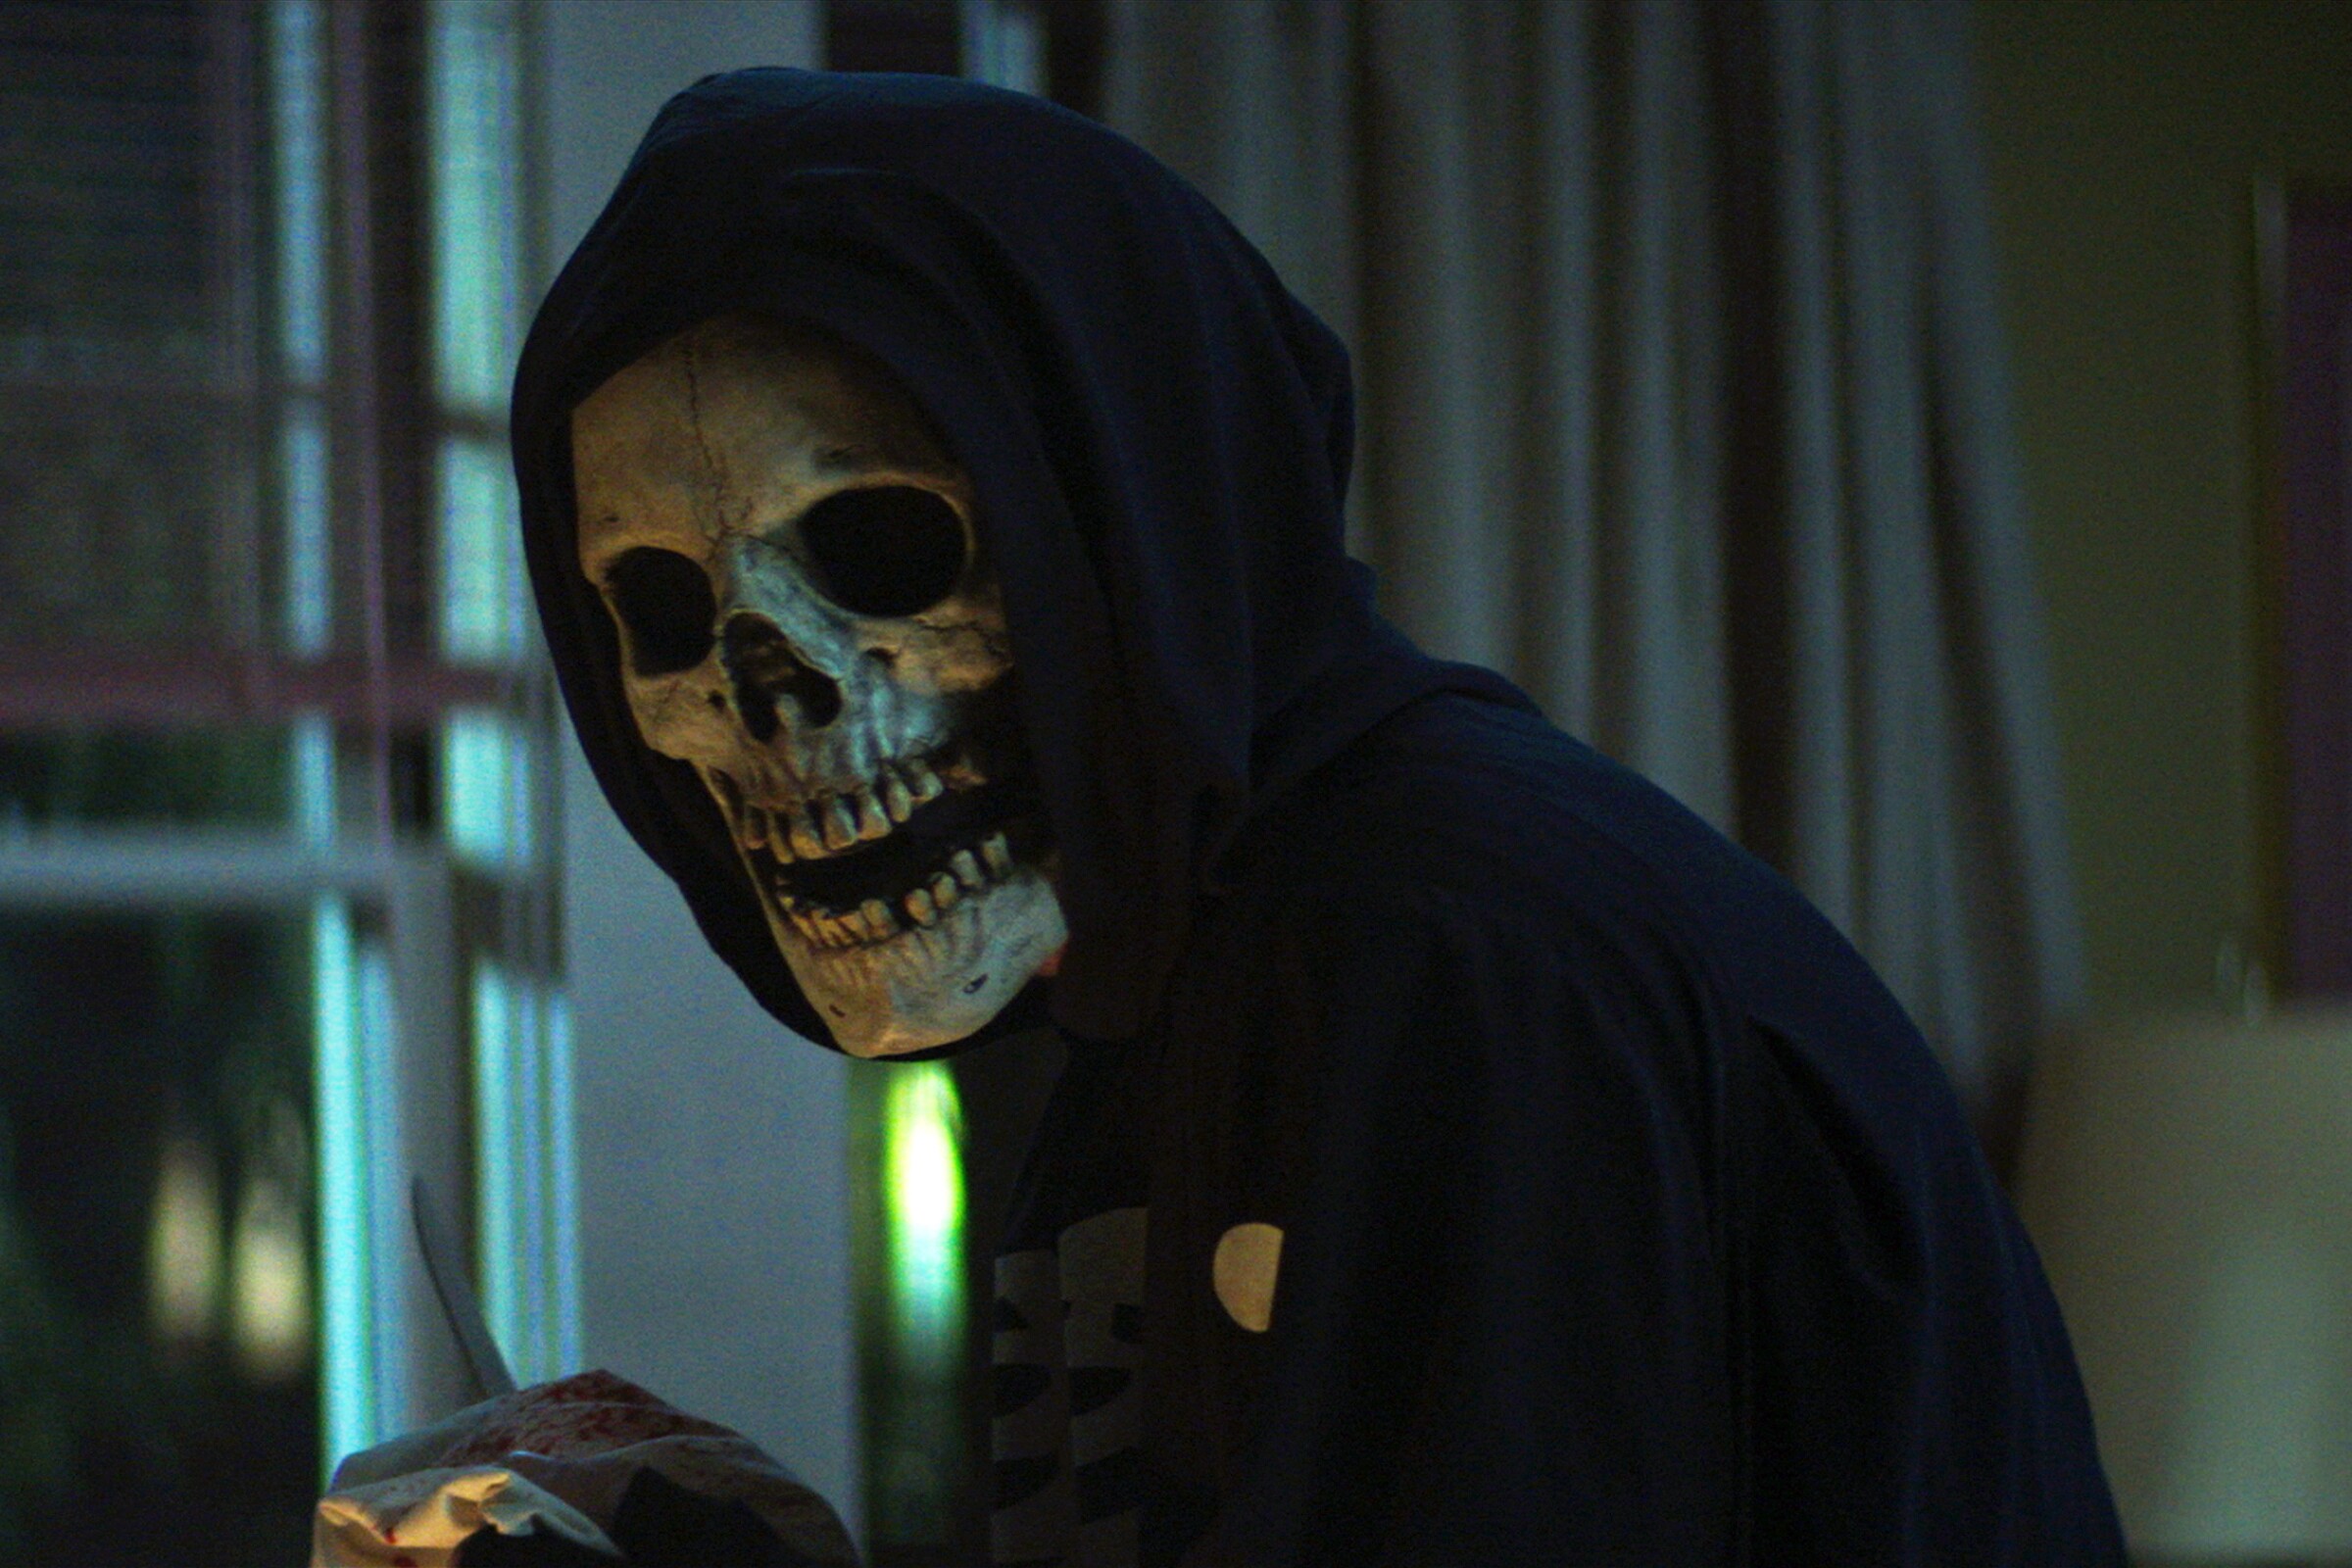 A hooded figure in a skull mask in a living room